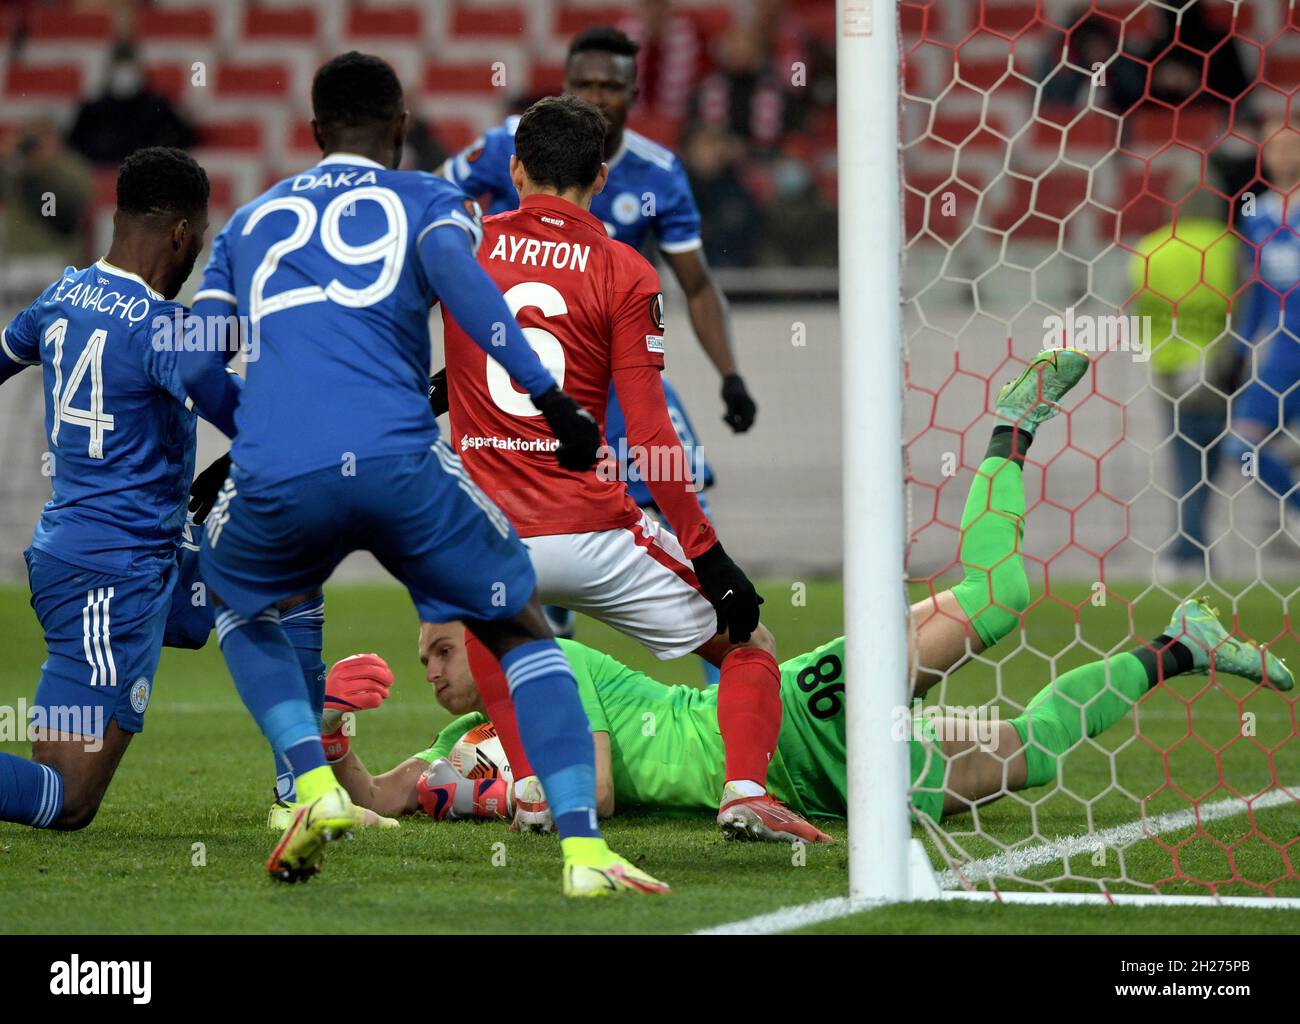 MOSCOW, RUSSIA, OCTOBER 20, 2021. The 2021/22 UEFA Europa League. Football  match between Spartak (Moscow) vs Leicester City (Leicester, England) at  Otkritie Arena in Moscow. Leicester von 3:4.Photo by Stupnikov Alexander/FC  Spartak